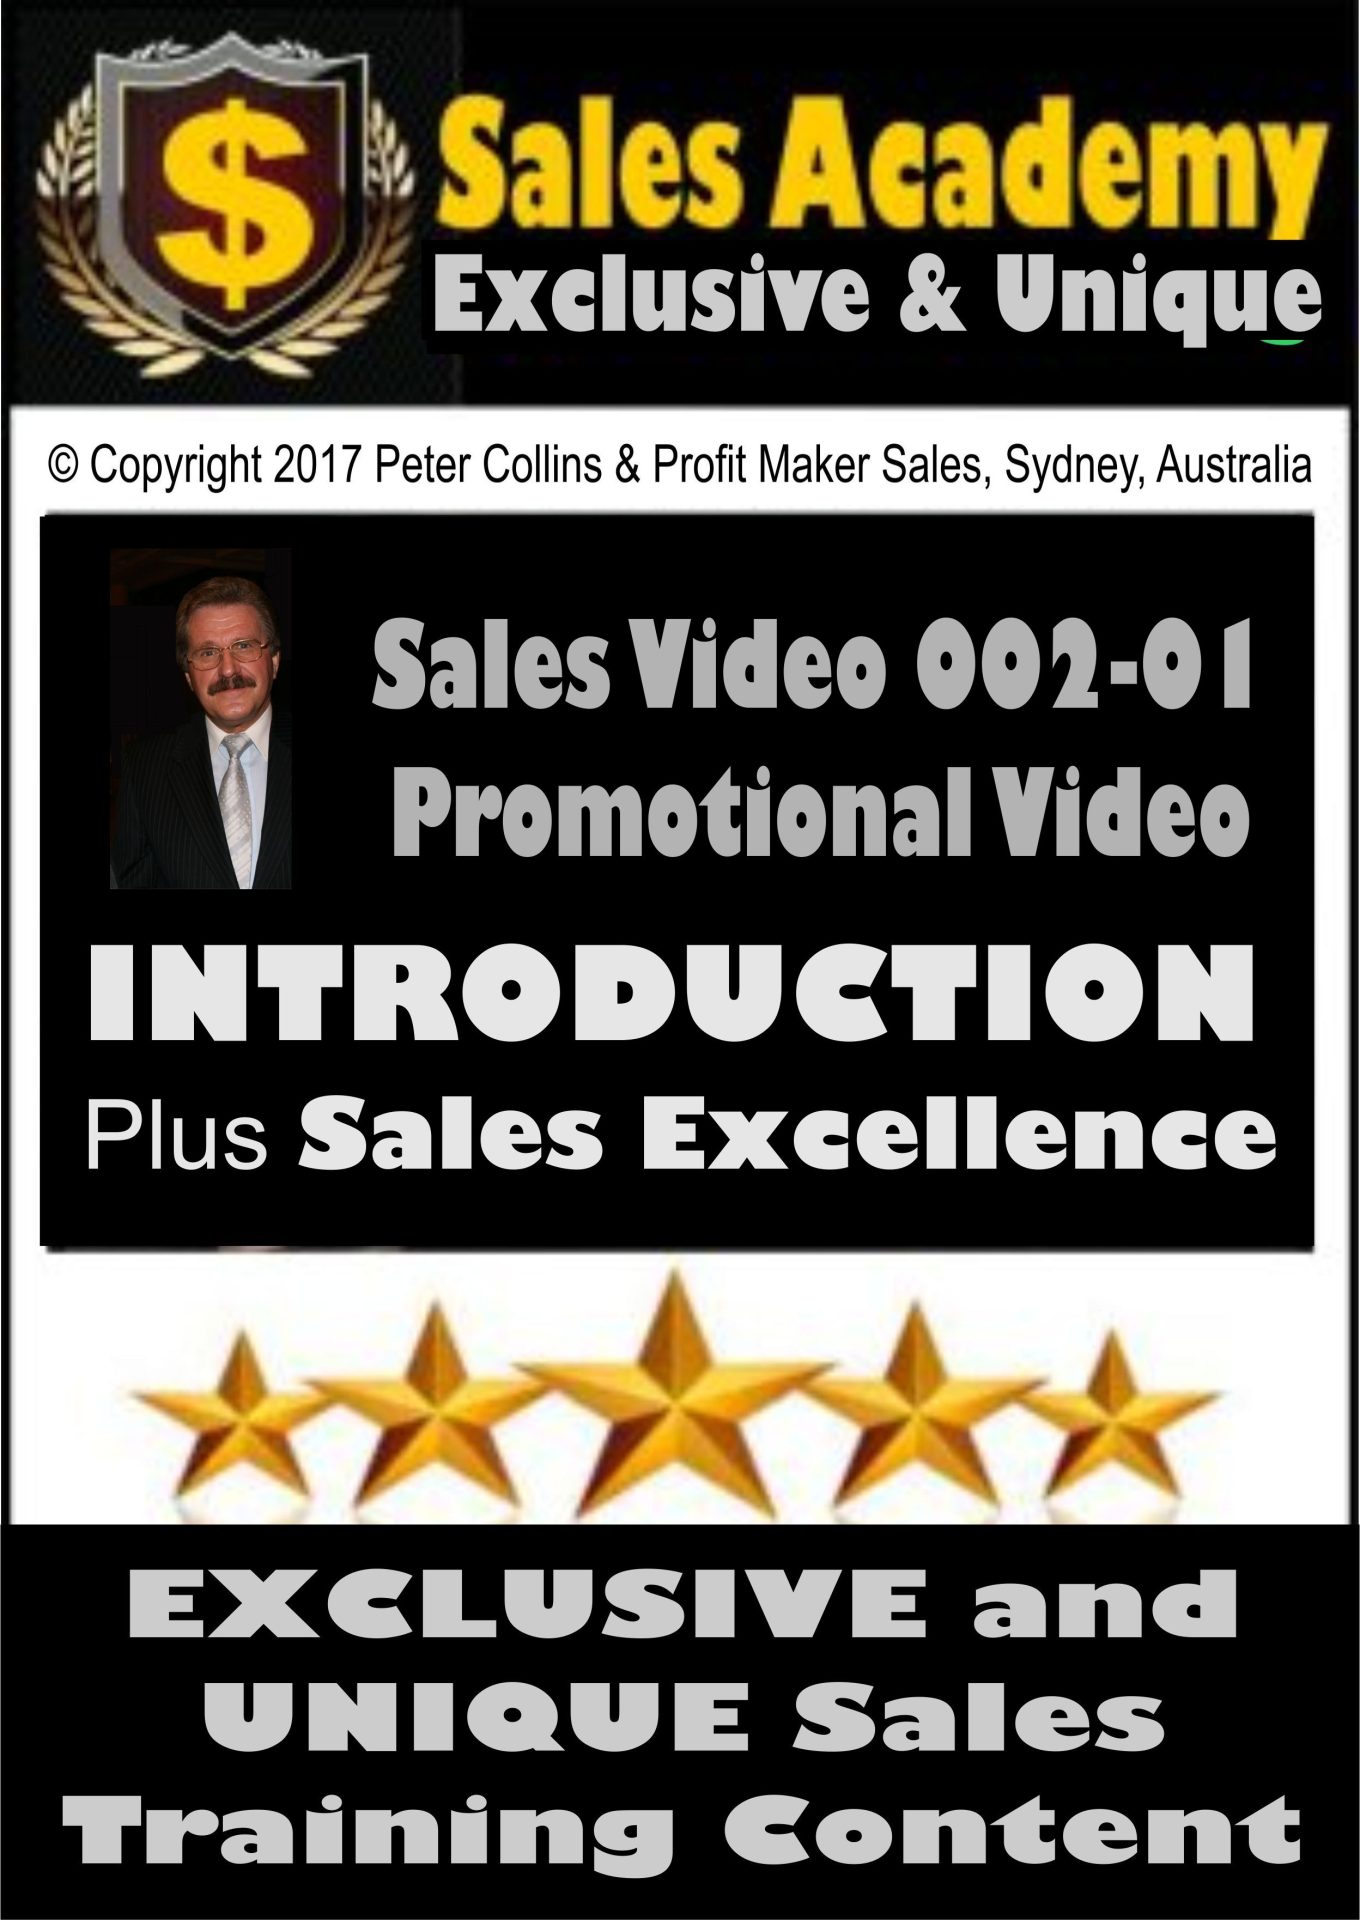 002 = Budget Training Videos 002-01 – INTRODUCTION & Pearls of Wisdom- 23 Videos – Total 1 Hour and 22 Minutes